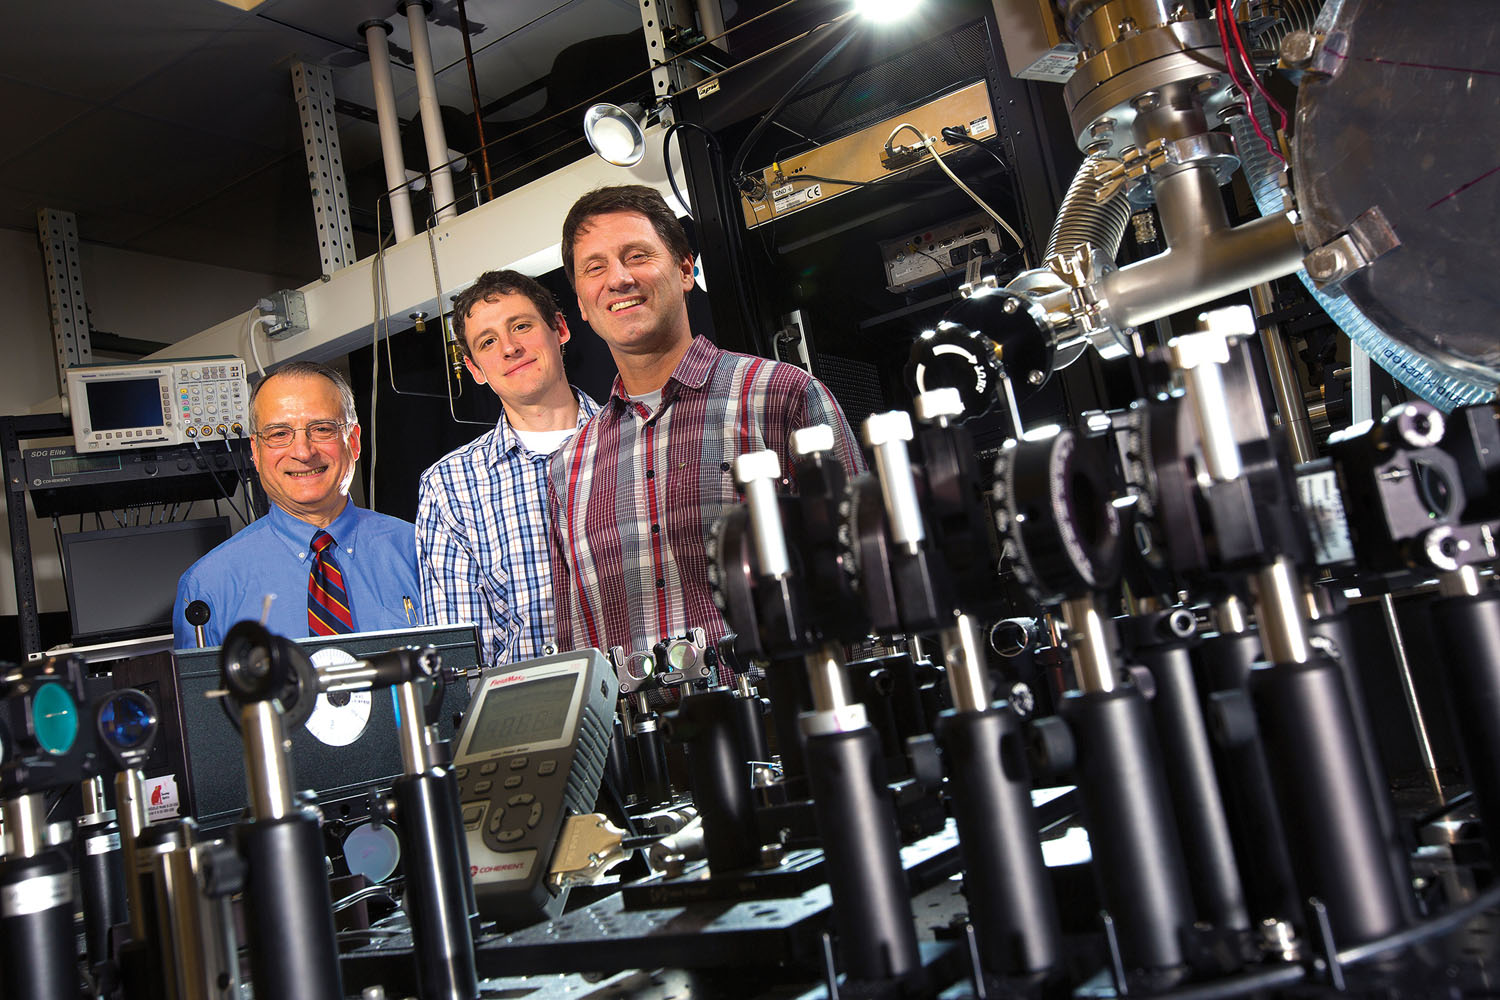 Anthony Starace, Martin Centurion and Herman Batelaan lead UNL’s consortium participation collaborating with colleagues at Kansas State University and the University of Kansas on the Nebraska-Kansas Consortium. The partnership seeks to expand all three universities’ capacity to study atomic, molecular and optical physics. February 11, 2015. Photo by Craig Chandler / University Communications.